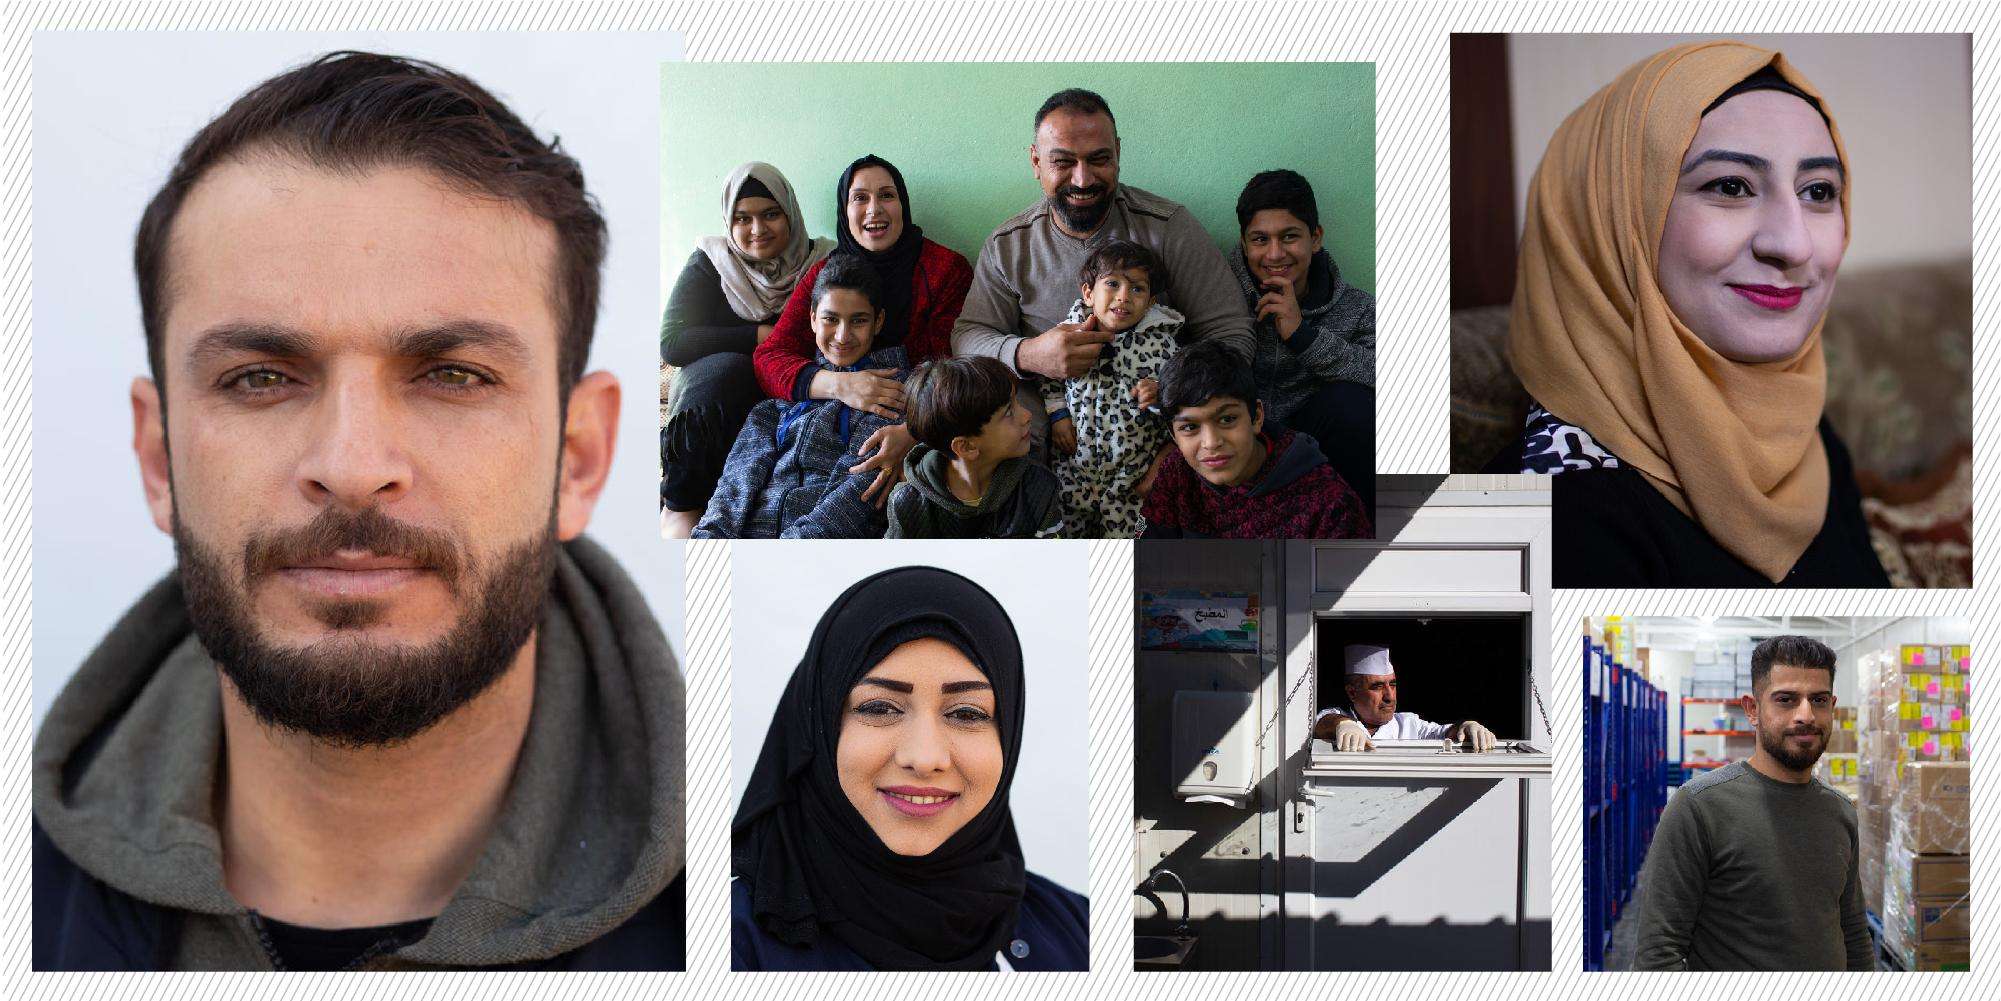 Faces of different MSF staff in Iraq